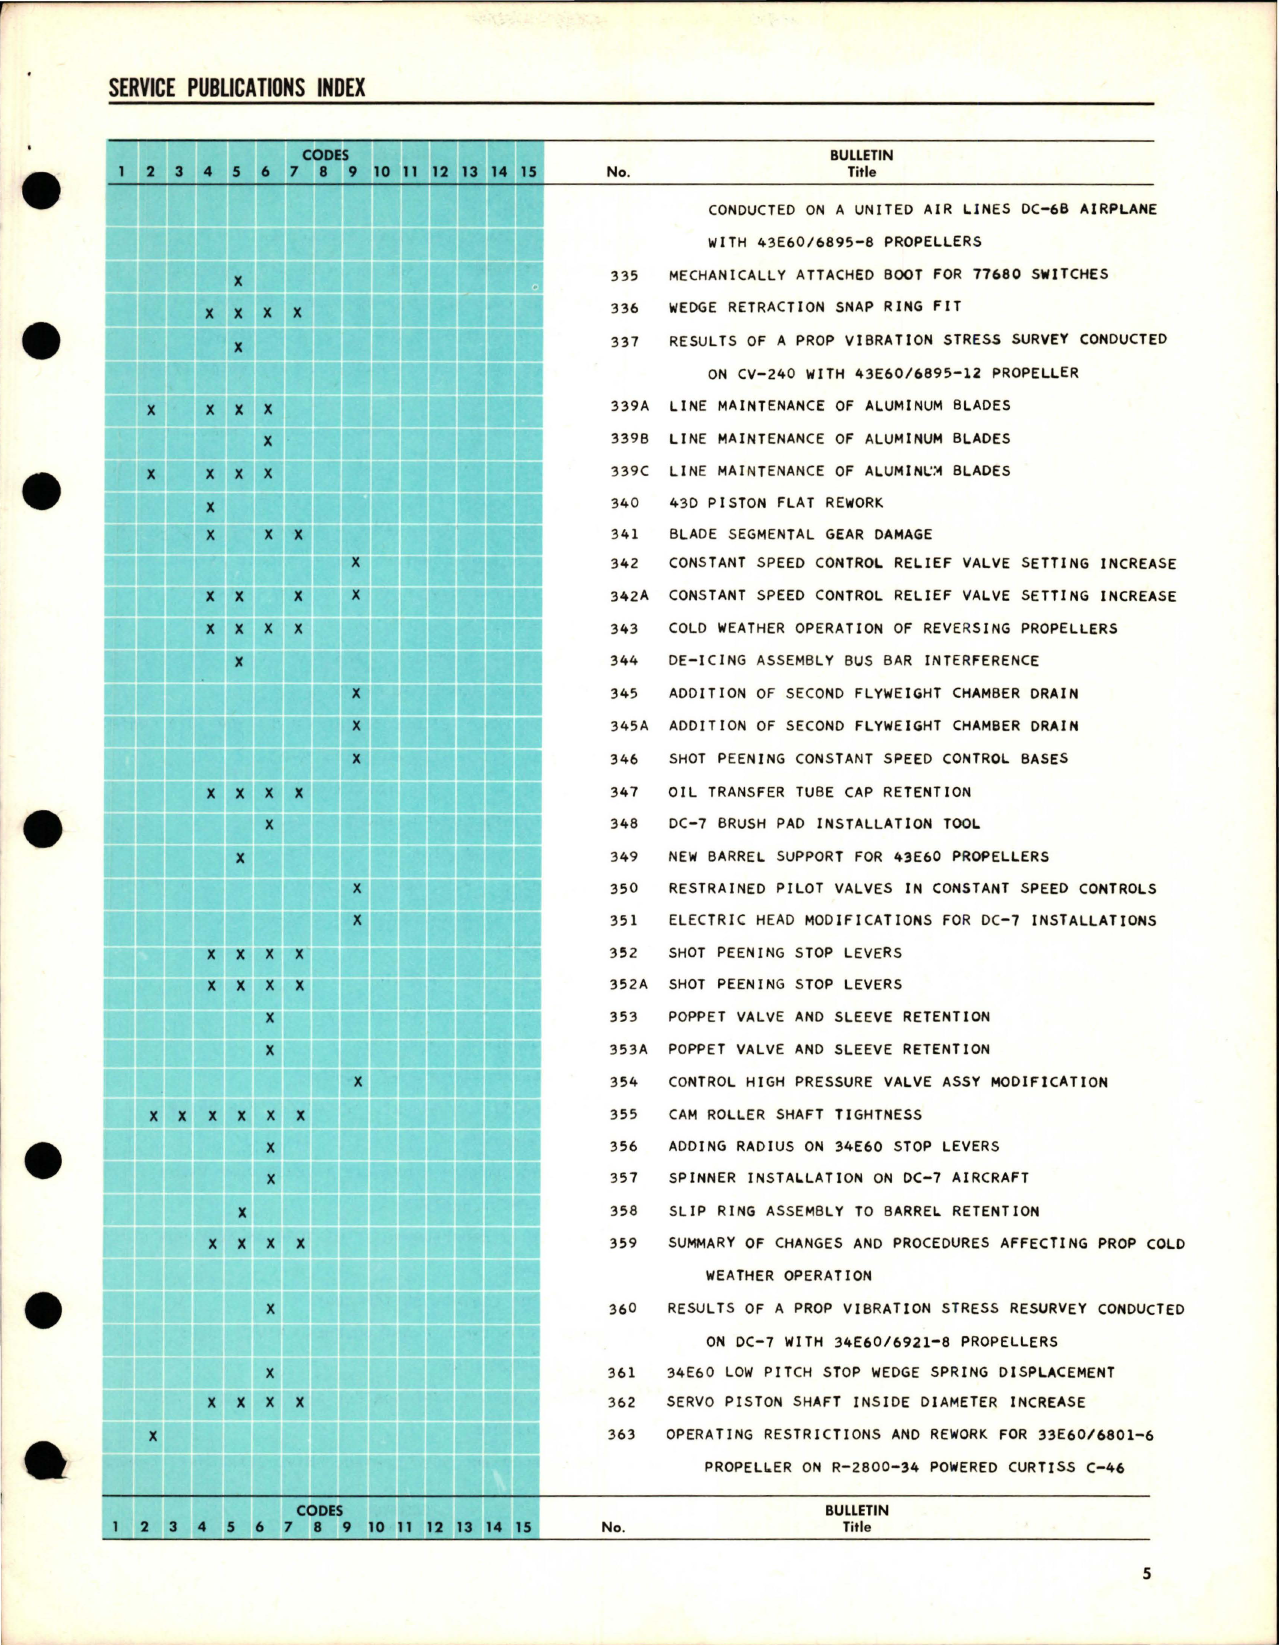 Sample page 5 from AirCorps Library document: Hamilton Standard Service Publications Index